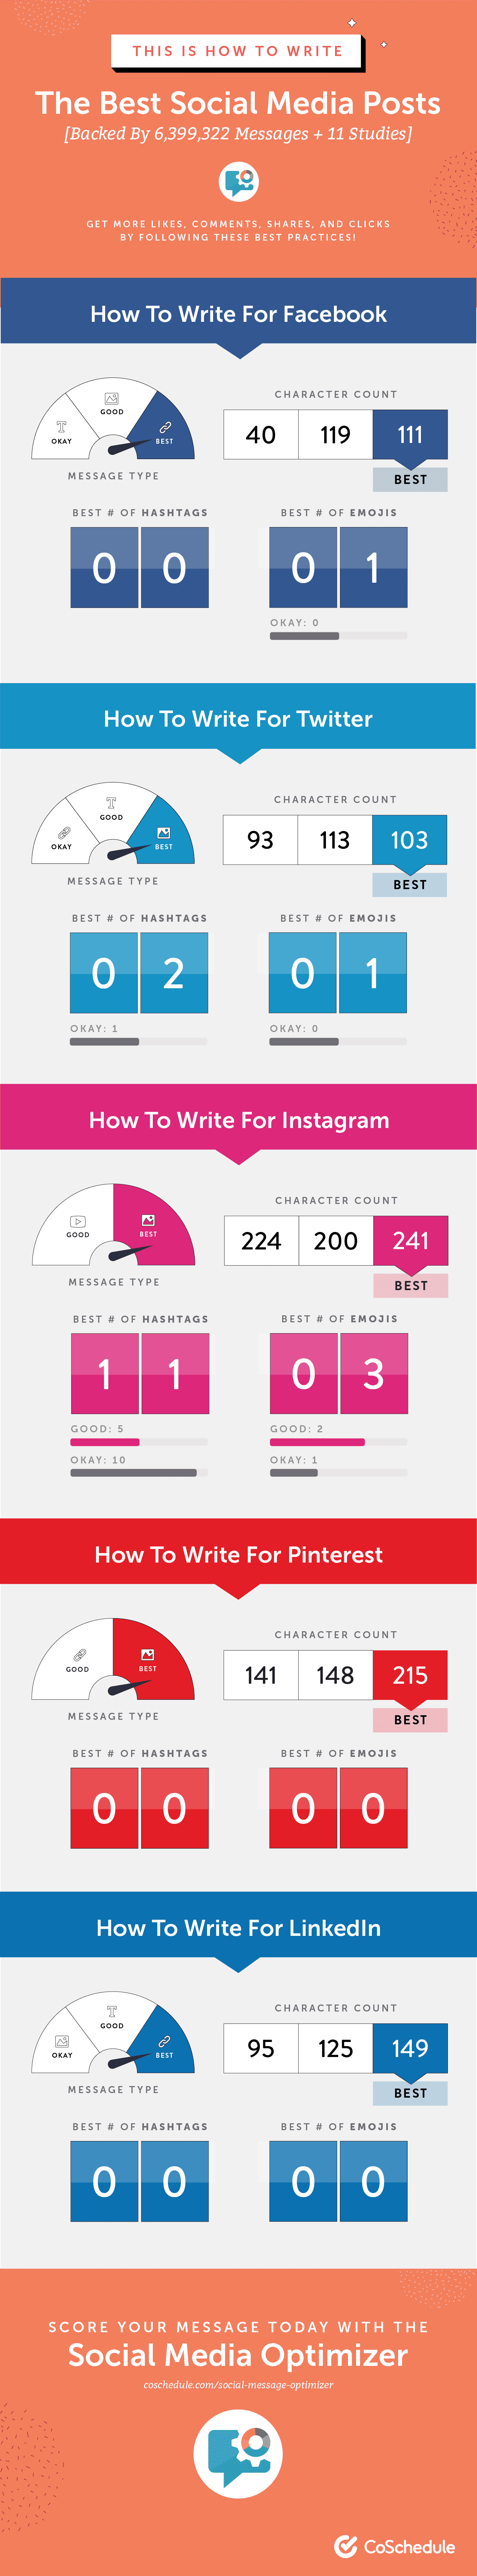 Writing the best social media posts infographic for Facebook, Twitter, Pinterest, Instagram and LinkedIn.